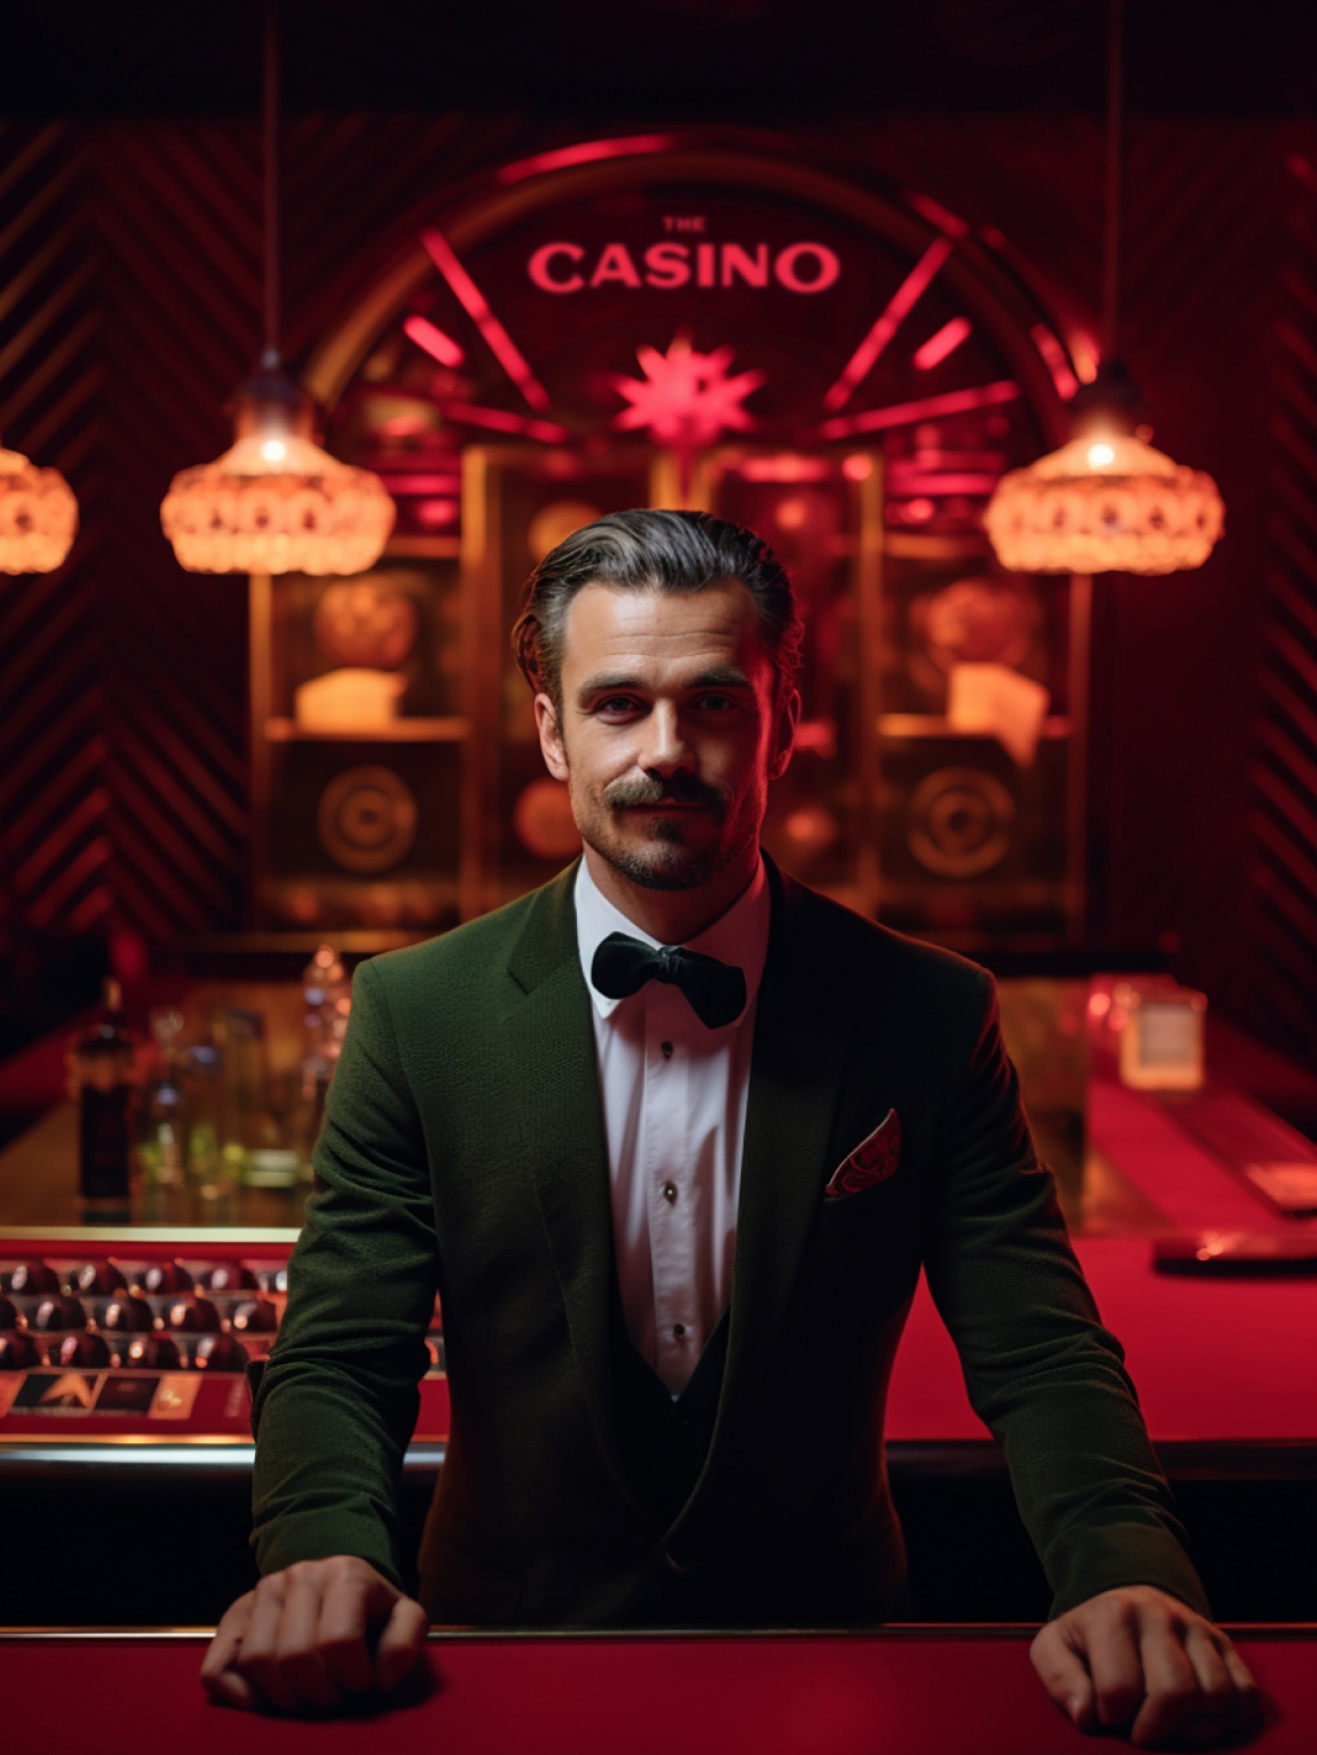 Man with bow tie standing in front of Casino sign